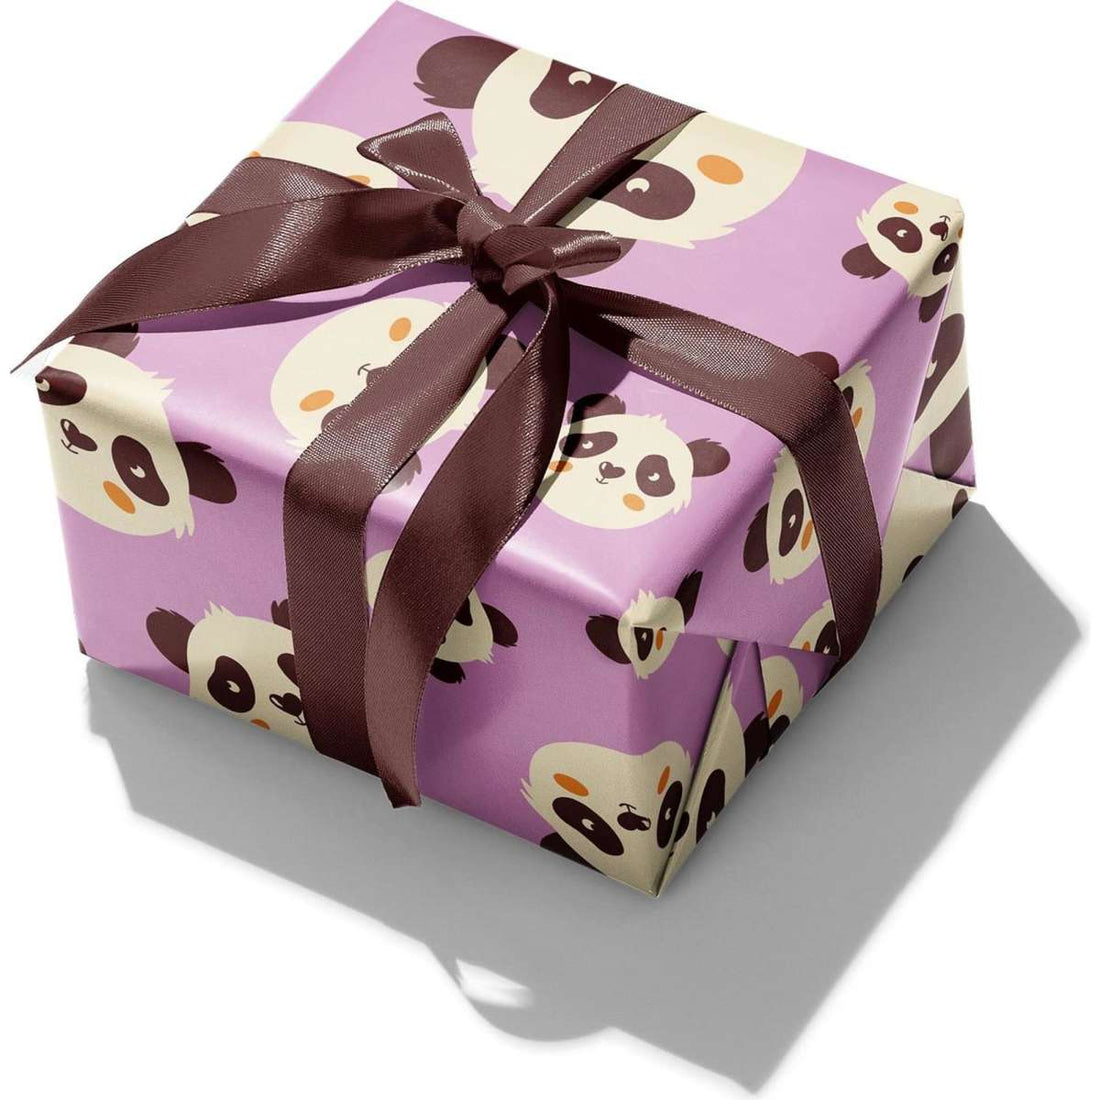 Givewrap Panda Gift 3 Piece Set - Gift Card, Wrapping Paper and Gift Bag